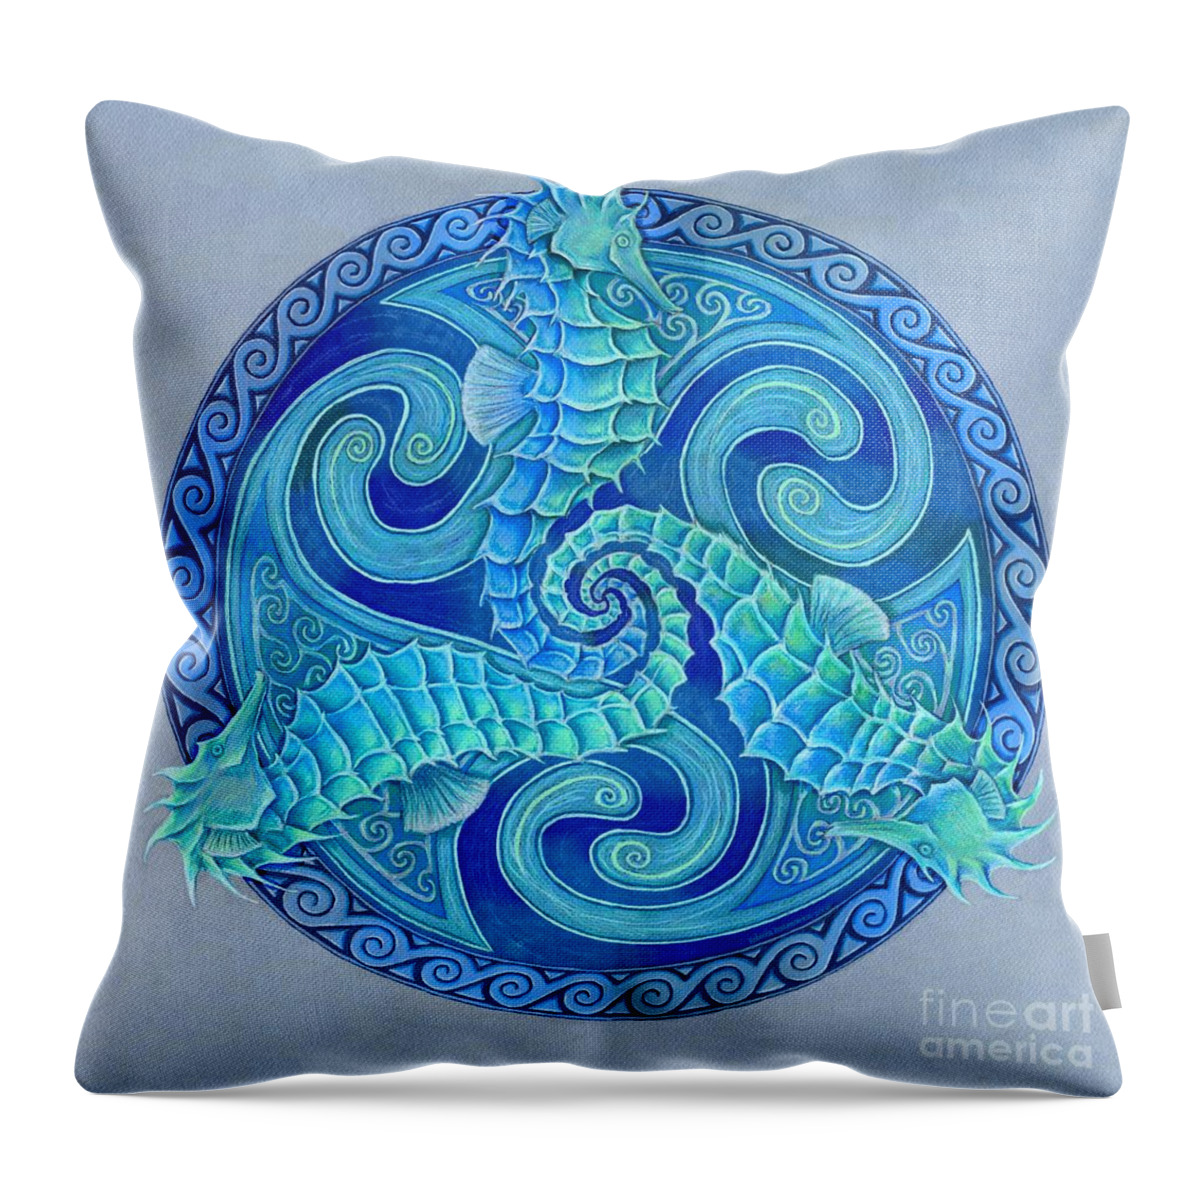 Seahorse Throw Pillow featuring the drawing Seahorse Triskele by Rebecca Wang